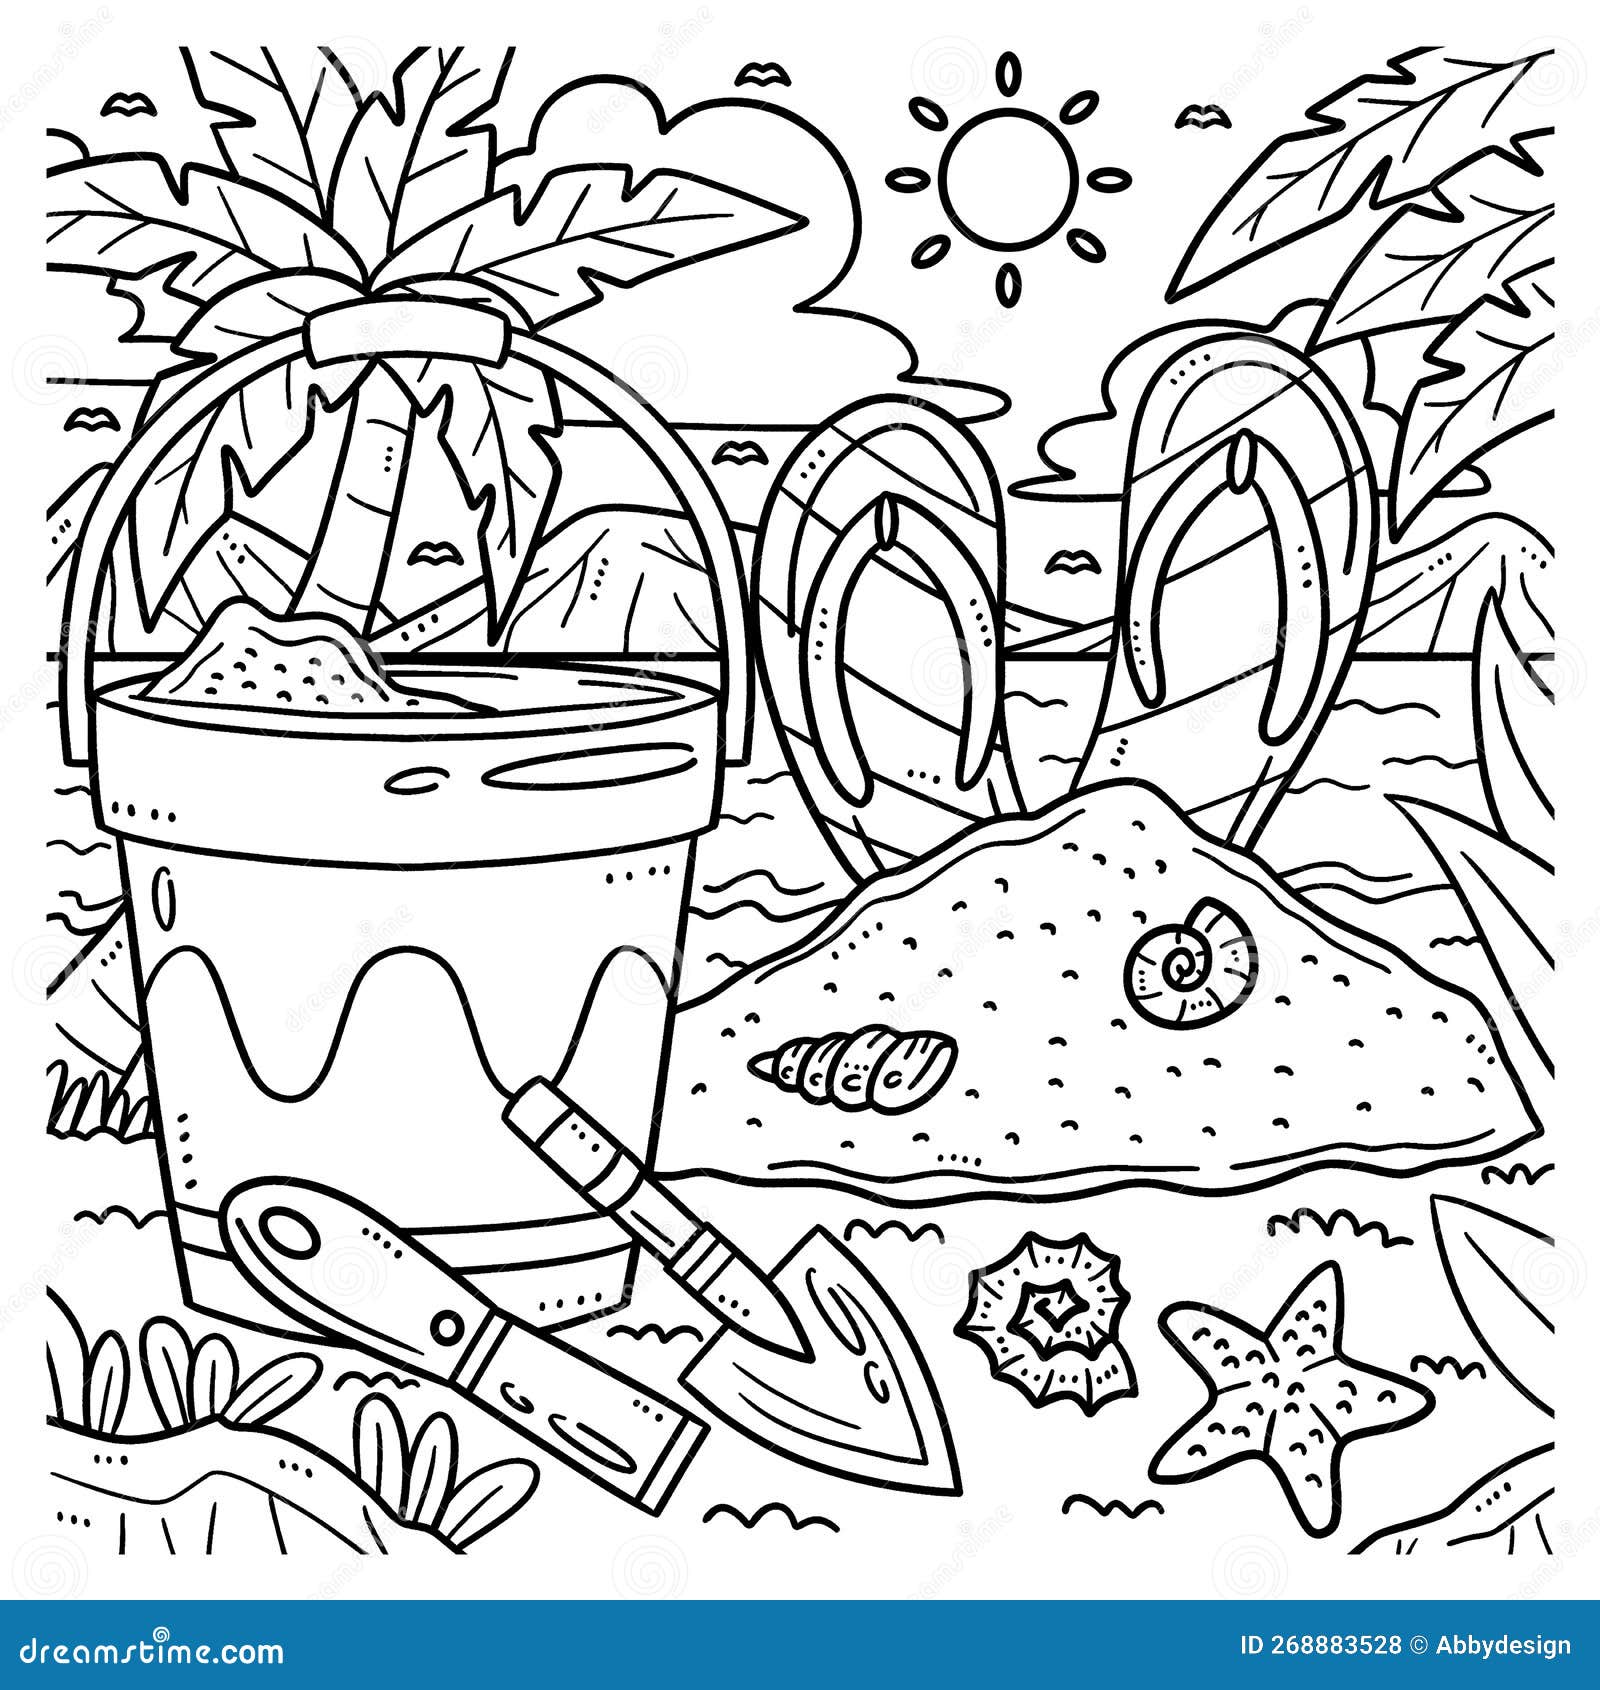 Summer sand castle tools coloring page for kids stock vector